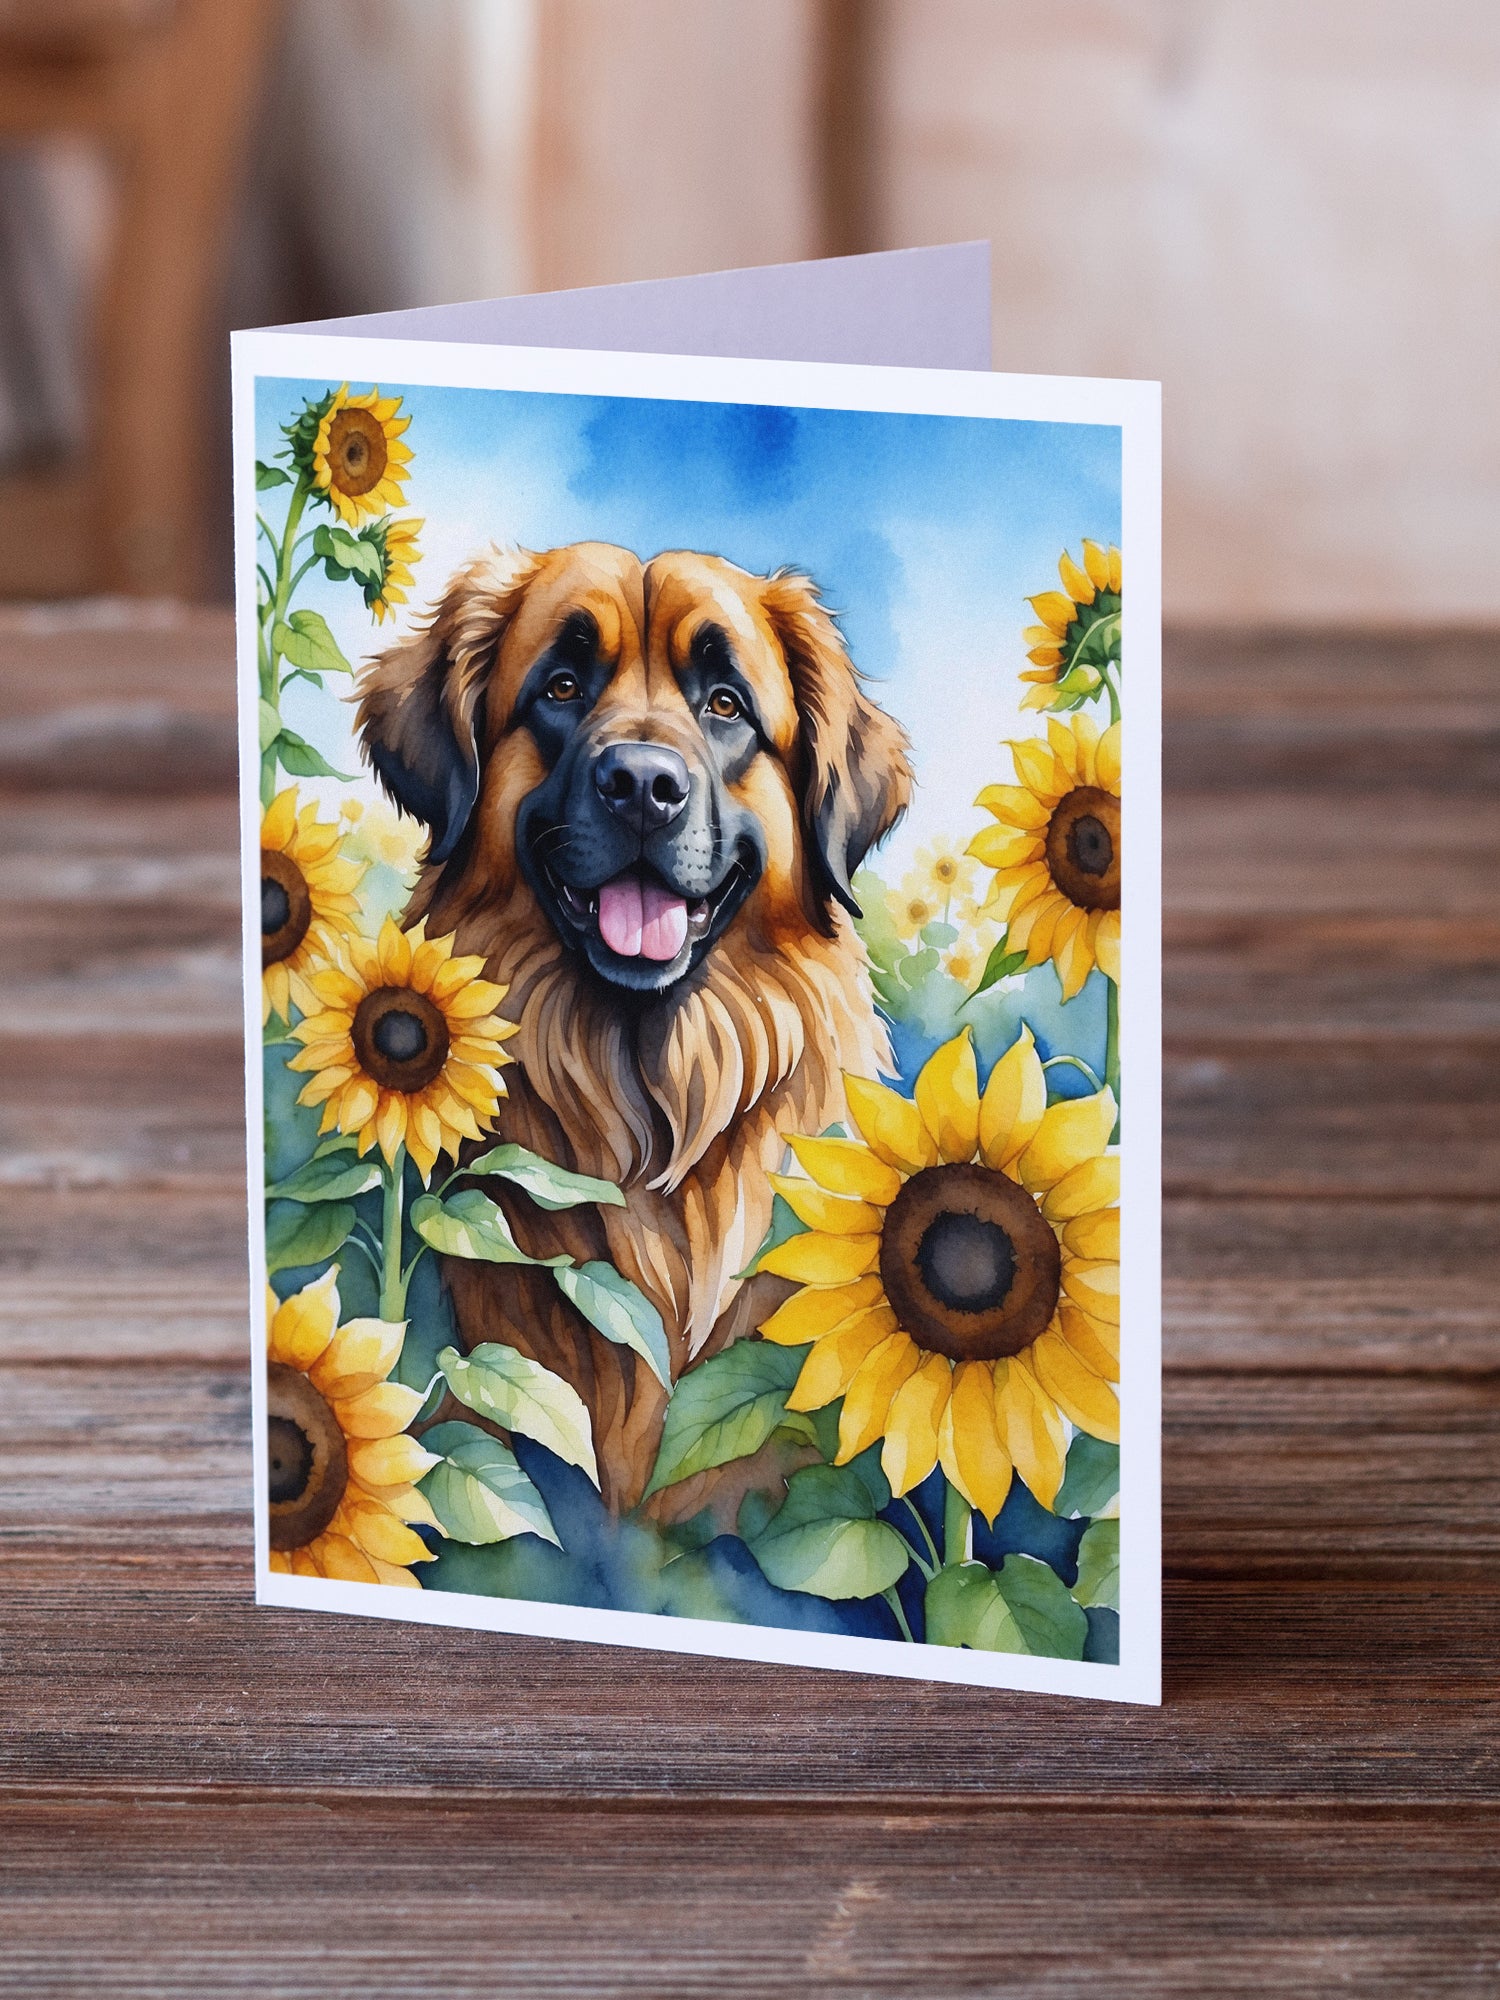 Buy this Leonberger in Sunflowers Greeting Cards Pack of 8